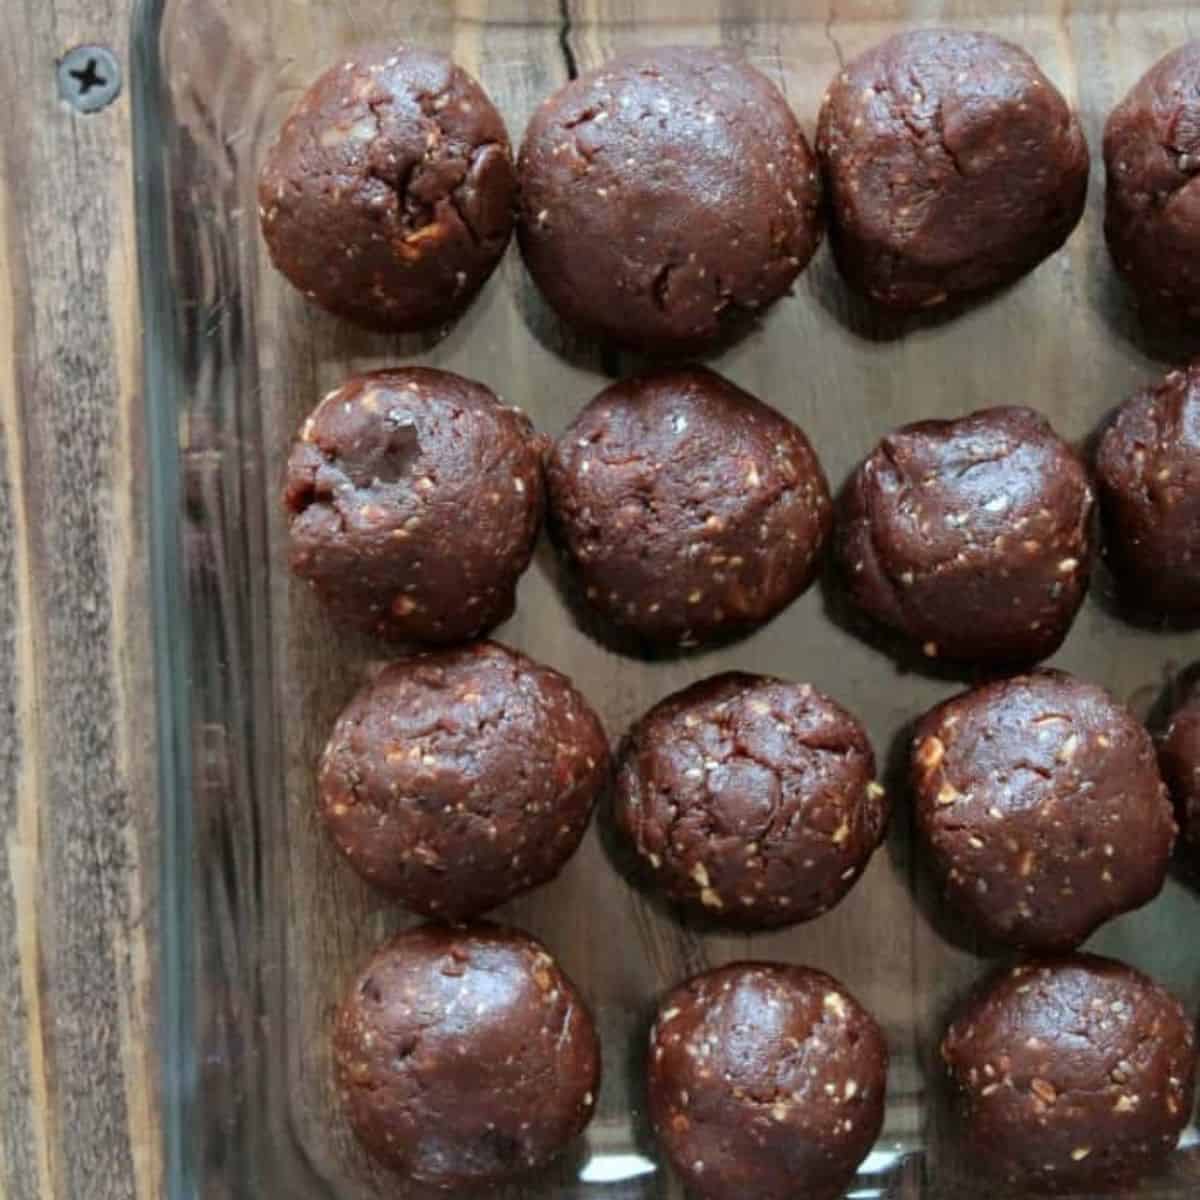 https://www.organizeyourselfskinny.com/wp-content/uploads/2022/12/chocolate-protein-balls-in-a-glass-container.jpg